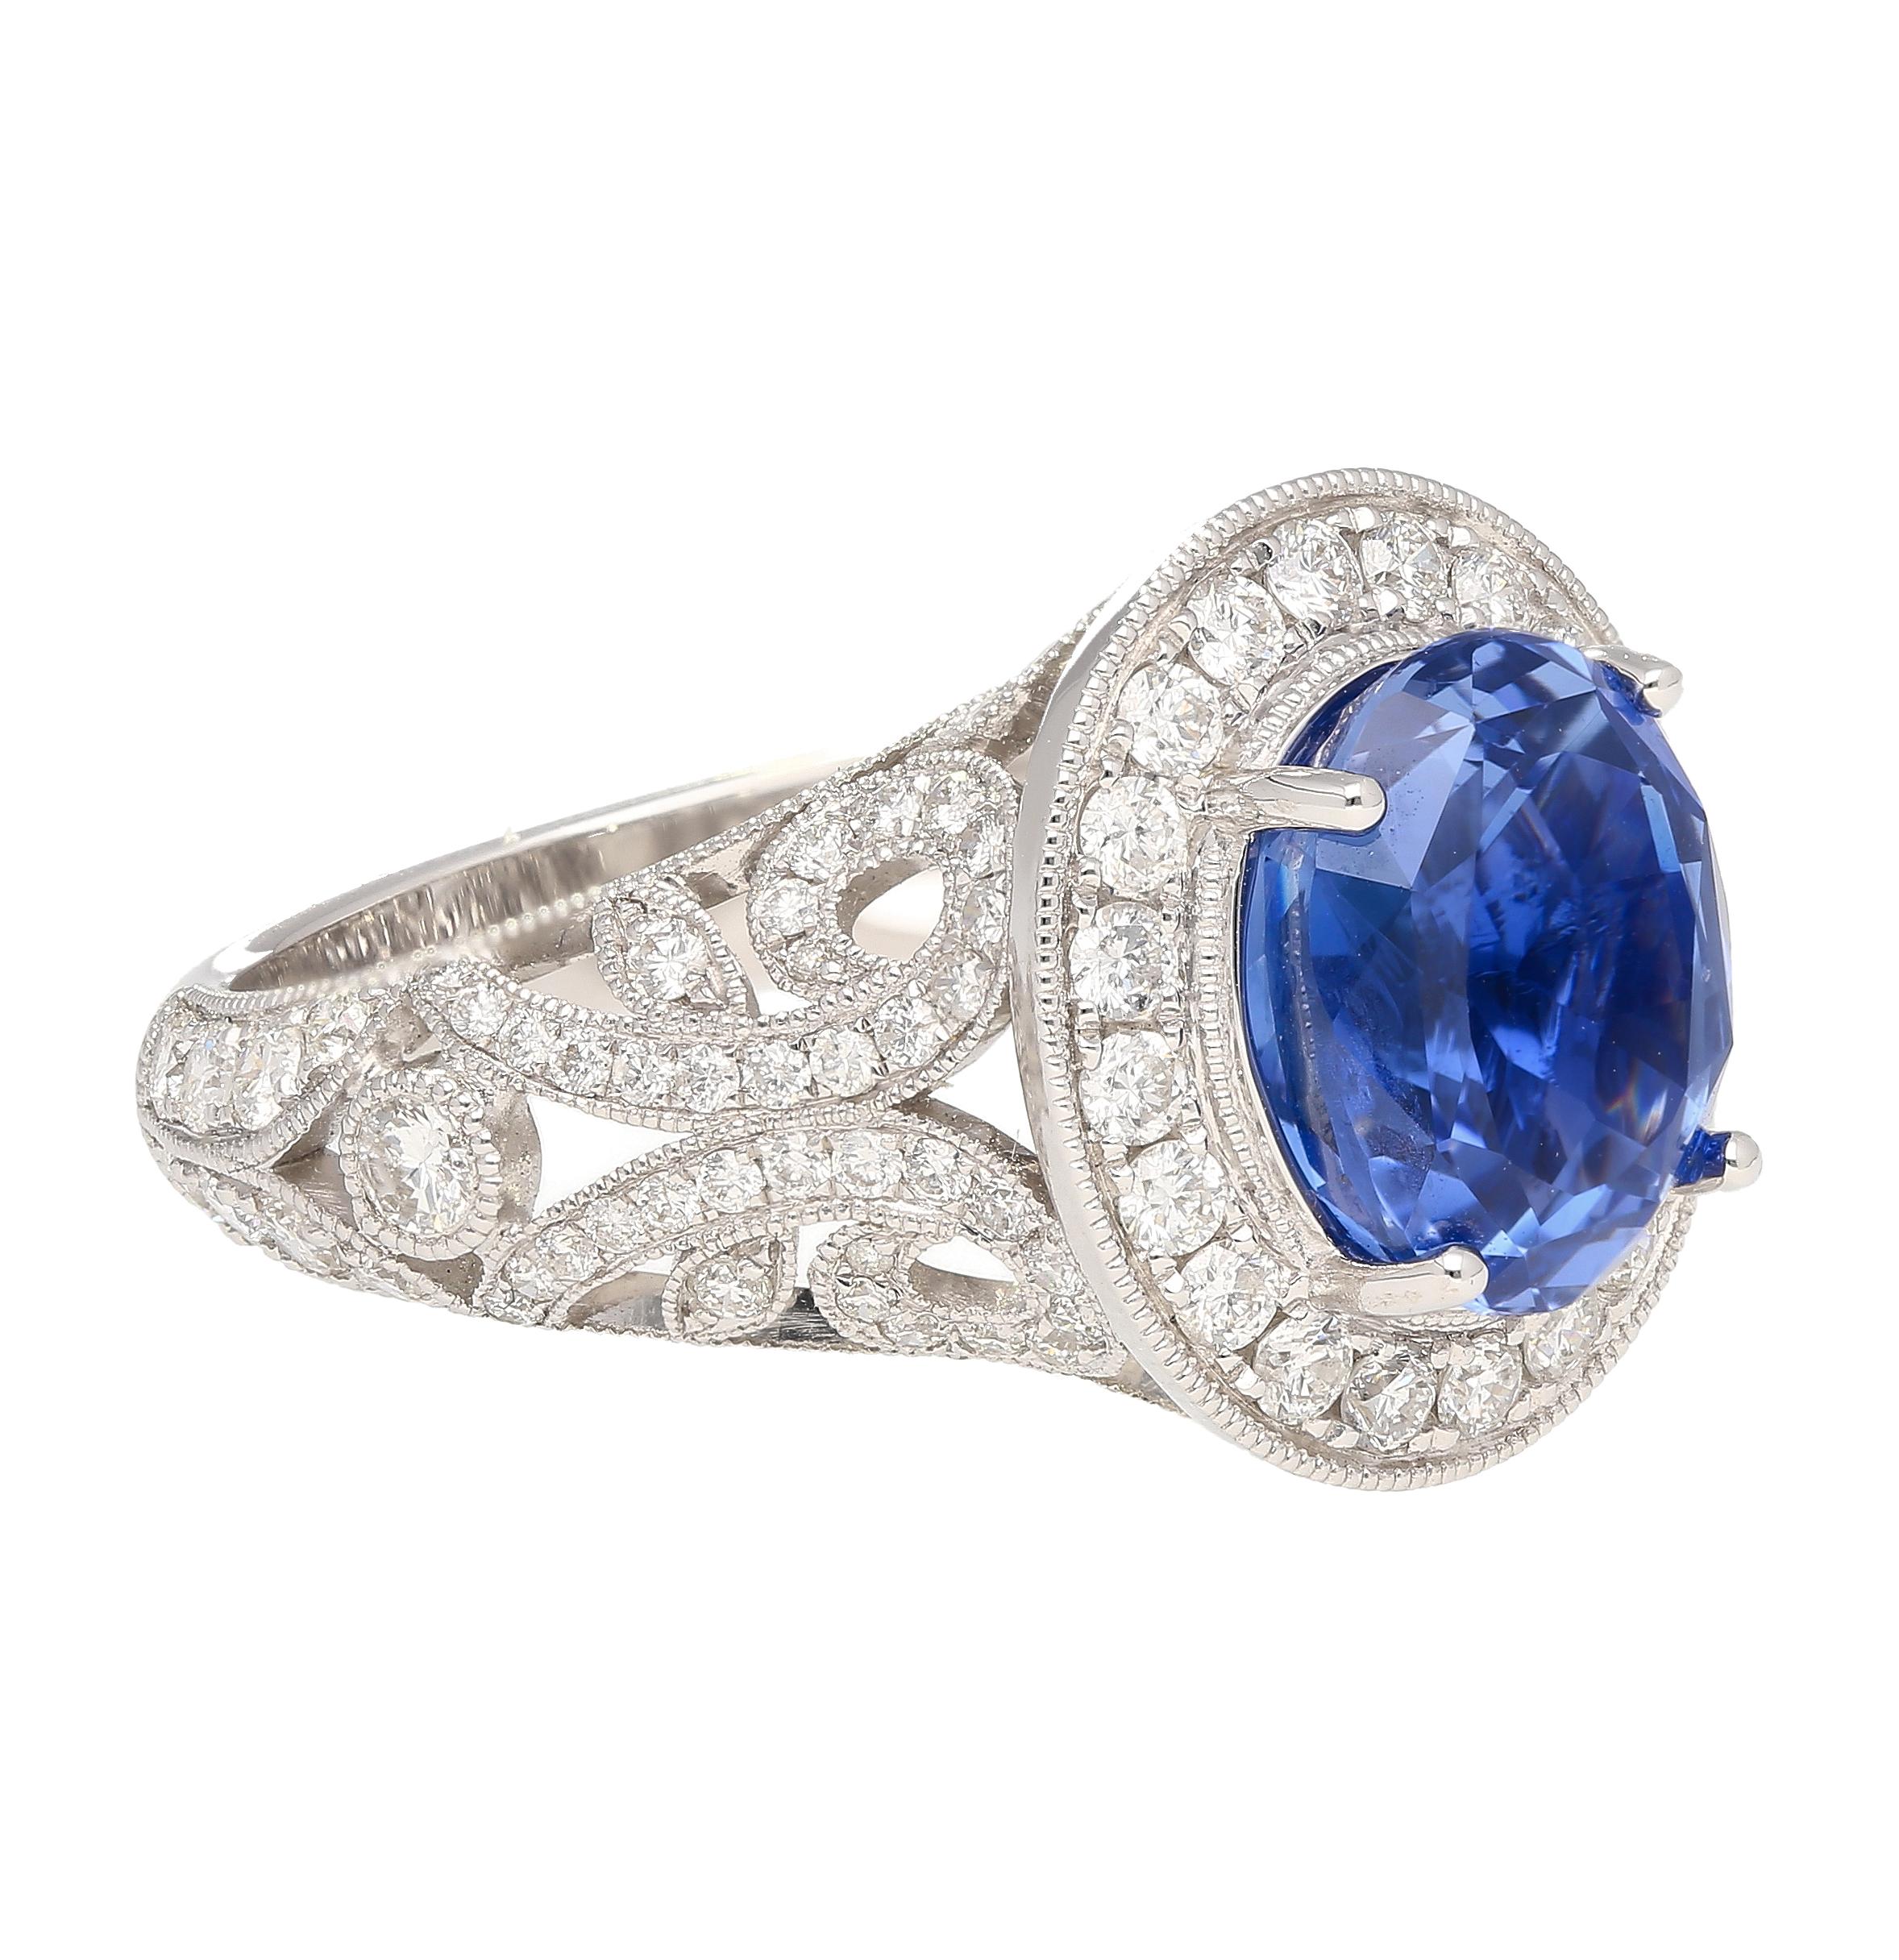 No Heat 4.84 Carat Violet-Blue Ceylon Sapphire with Diamonds in 18K Gold Ring In New Condition For Sale In Miami, FL